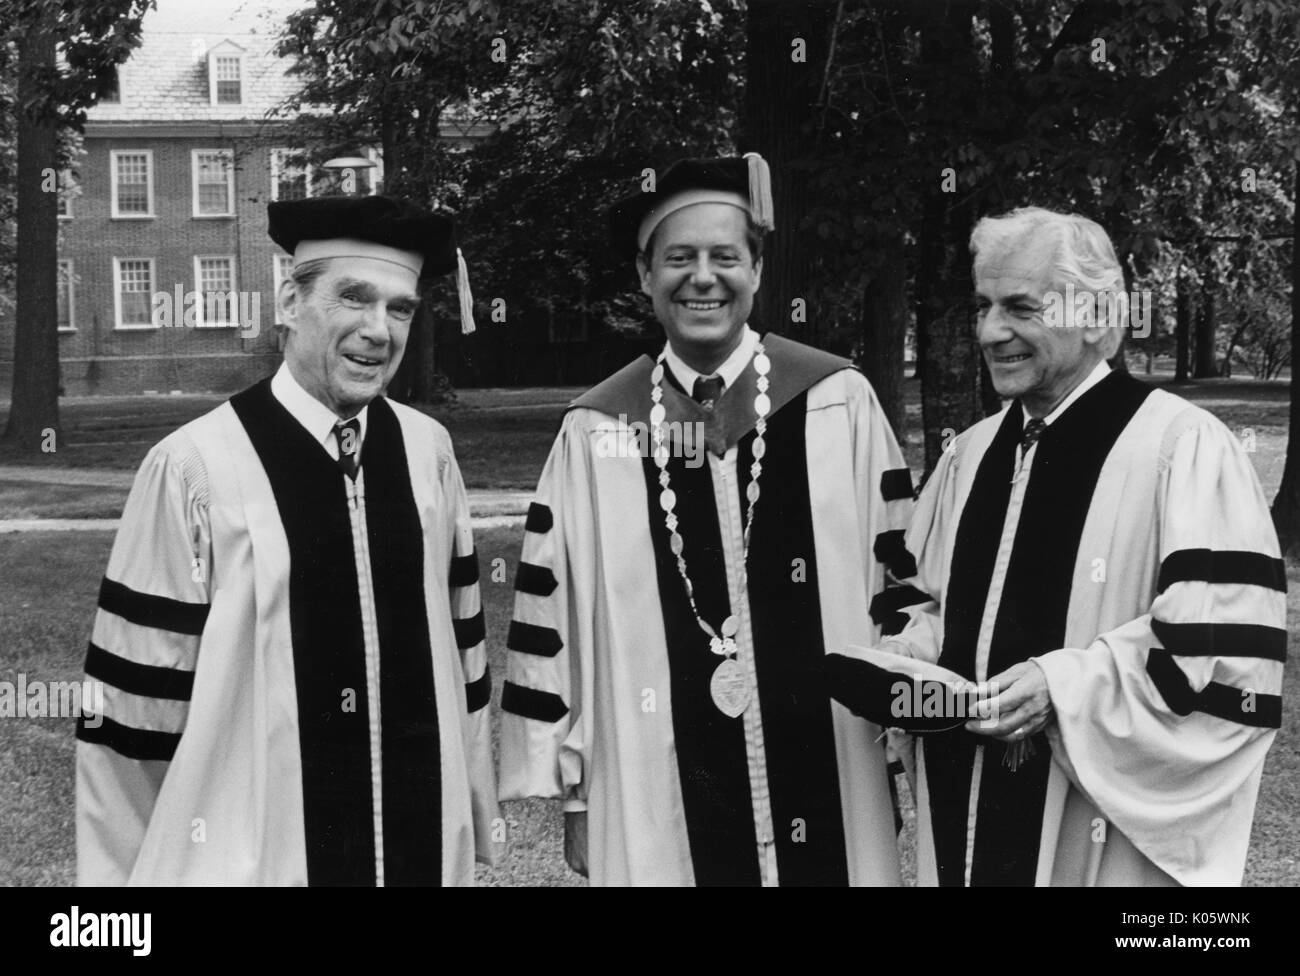 Half-body portrait of three men at 1980 Johns Hopkins commencement, all in cap and gown attire, from left to right: Professor Daniel K Ludwig, President Steven Muller, and musician Leonard Bernstein, who has removed his hat and drawn the other two's attention towards him, 1980. Stock Photo